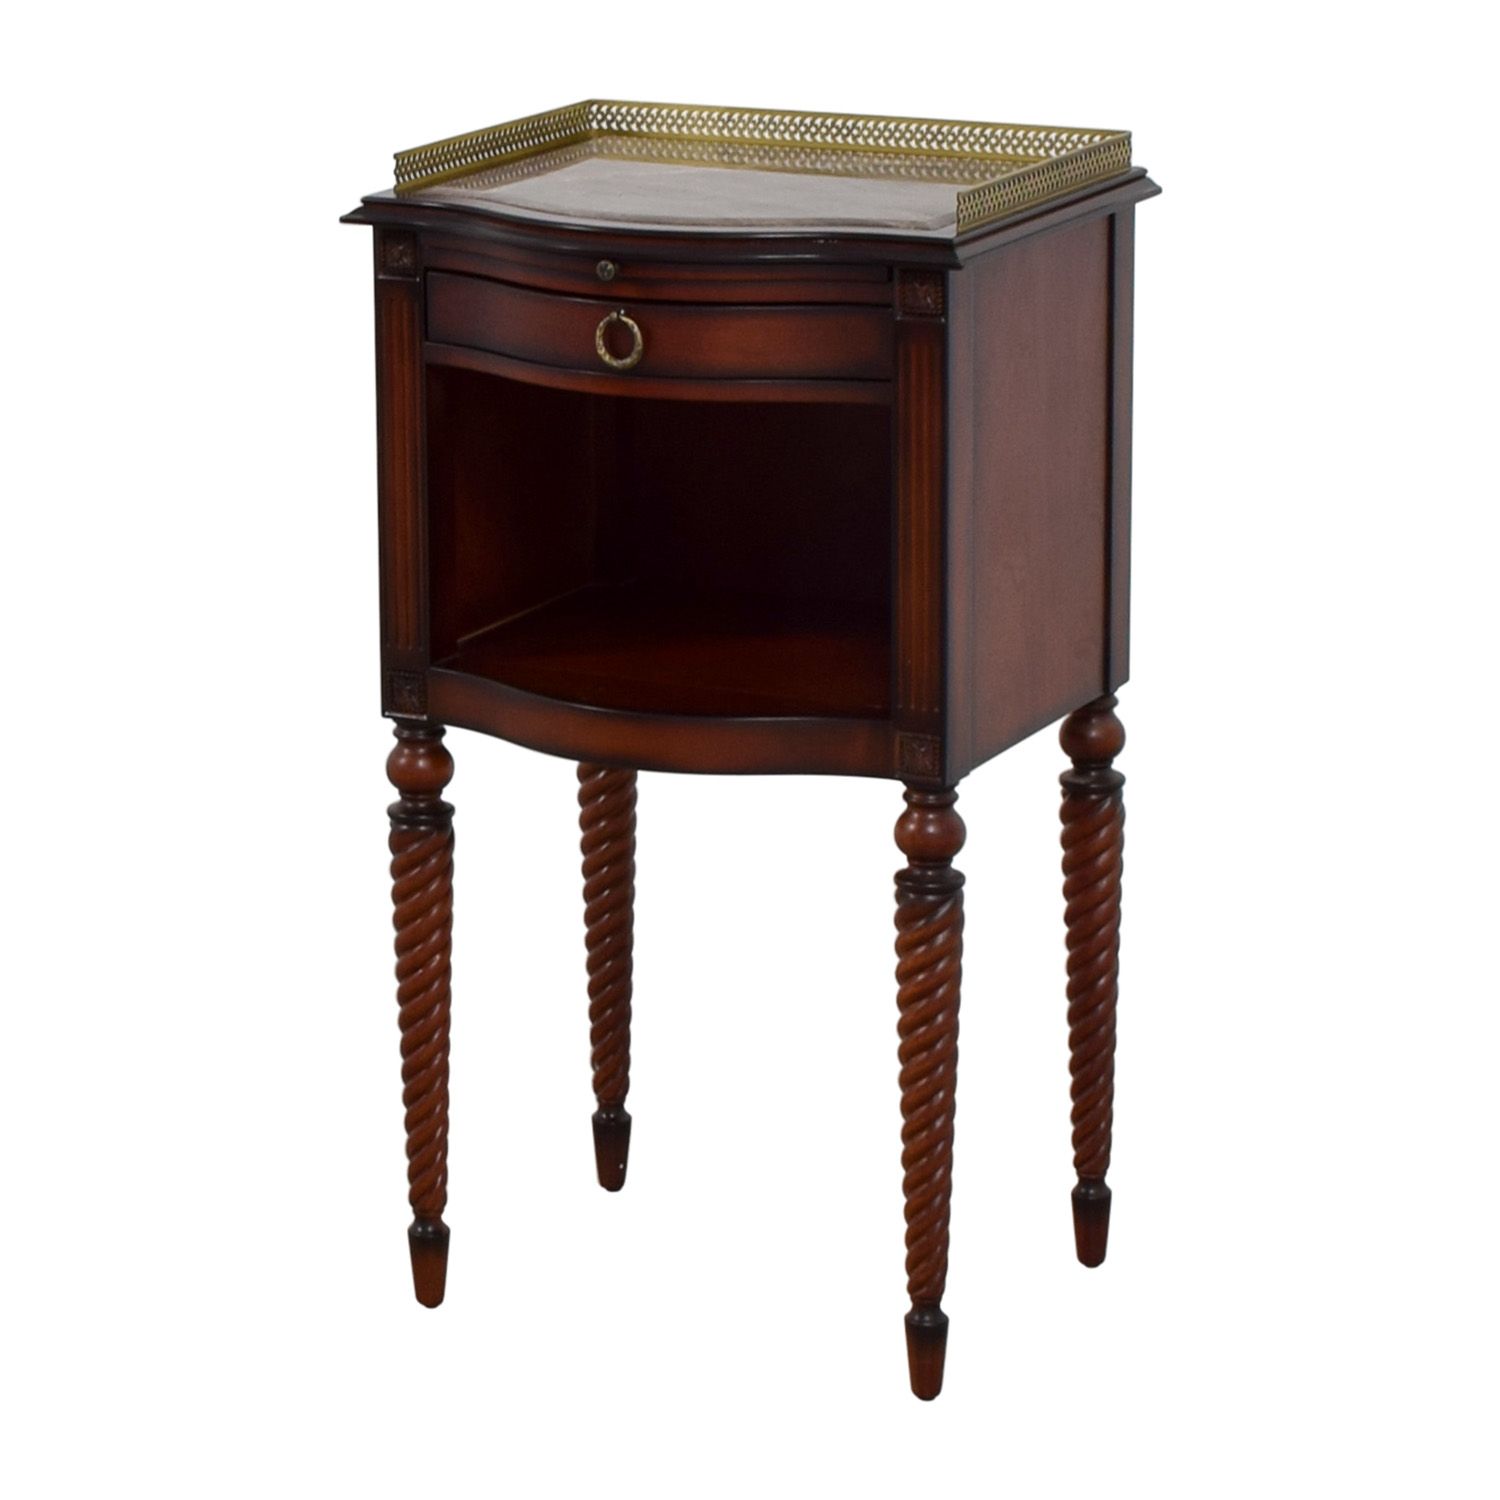 off bombay marble top with gold trim wood accent table second hand cherry inch deep console cabinet inexpensive round tablecloths antique and glass coffee rattan garden furniture